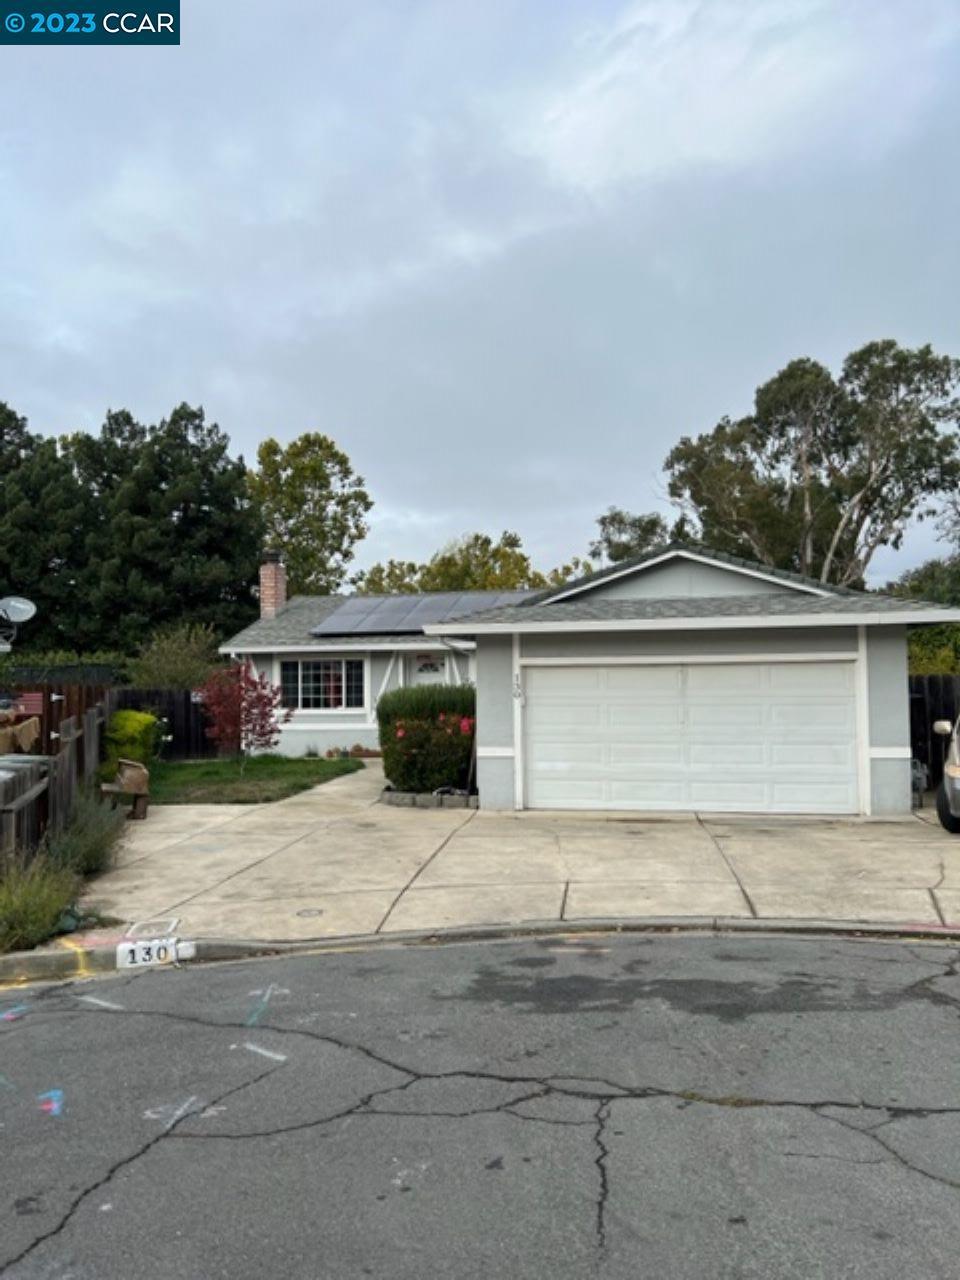 Move-in ready single-story house, 3 bedrooms 2 baths. Two fireplaces, newly painted interior, with newer flooring throughout. Washer and Dryer not included in the sale. ( if interested make an offer)